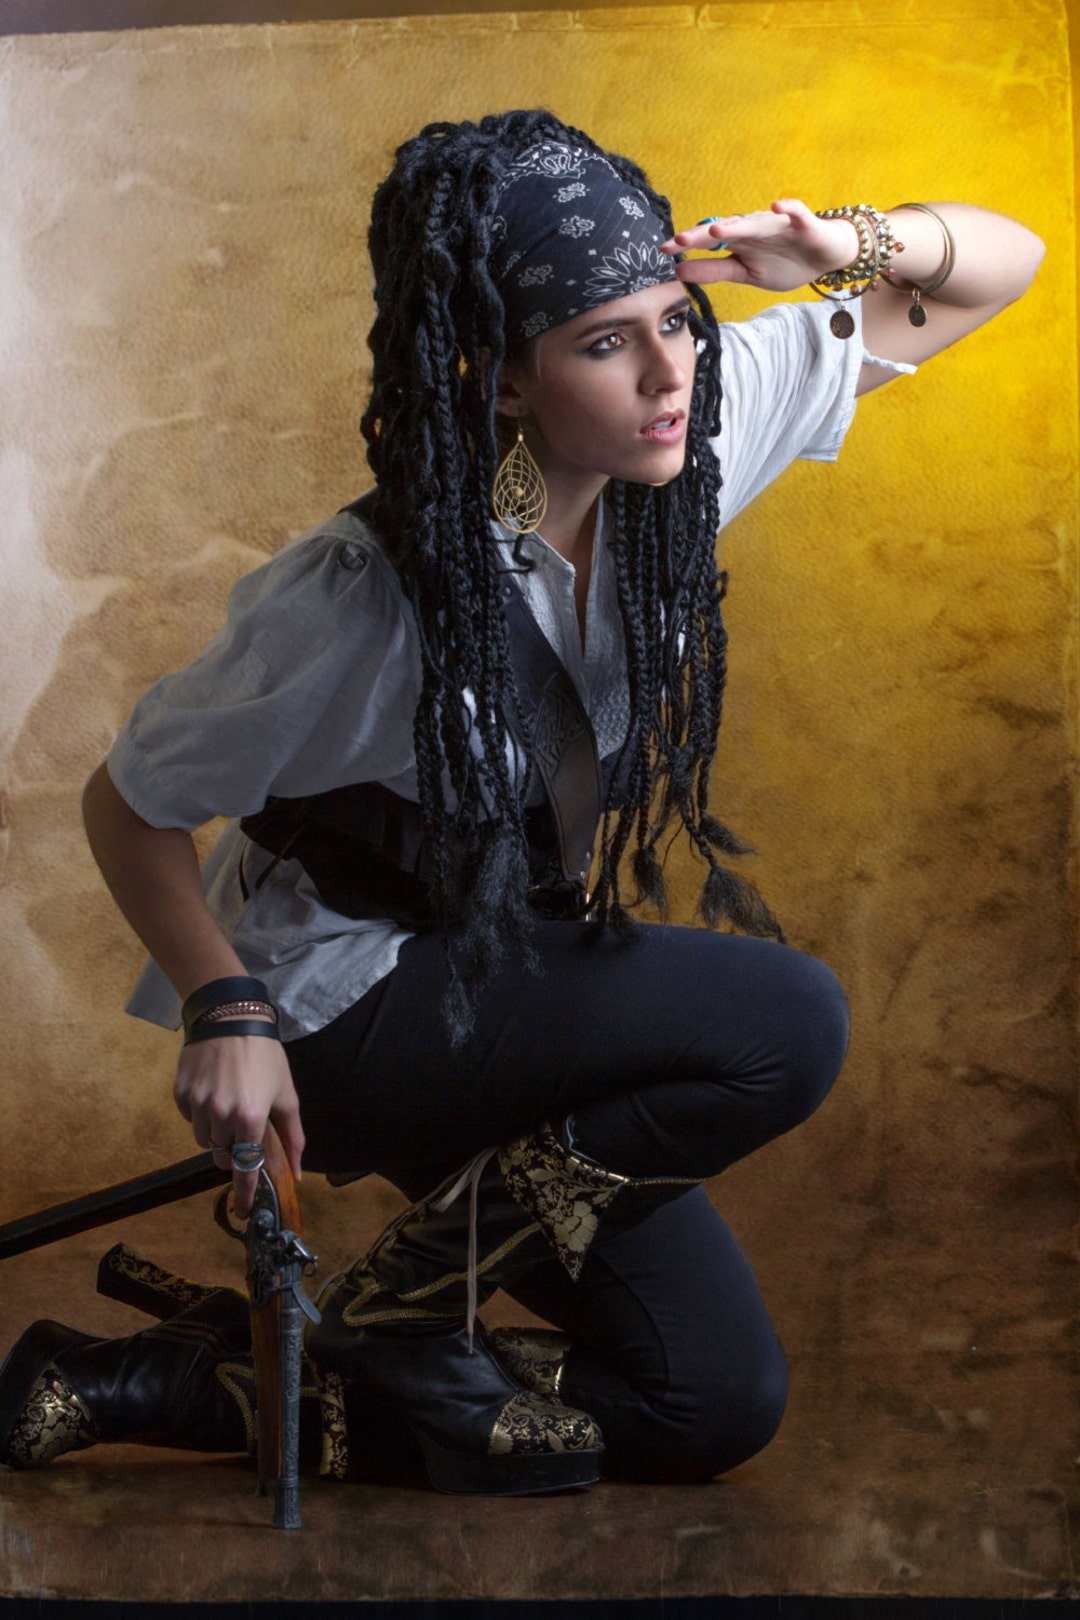 A cosplay character with dreadlocks hair